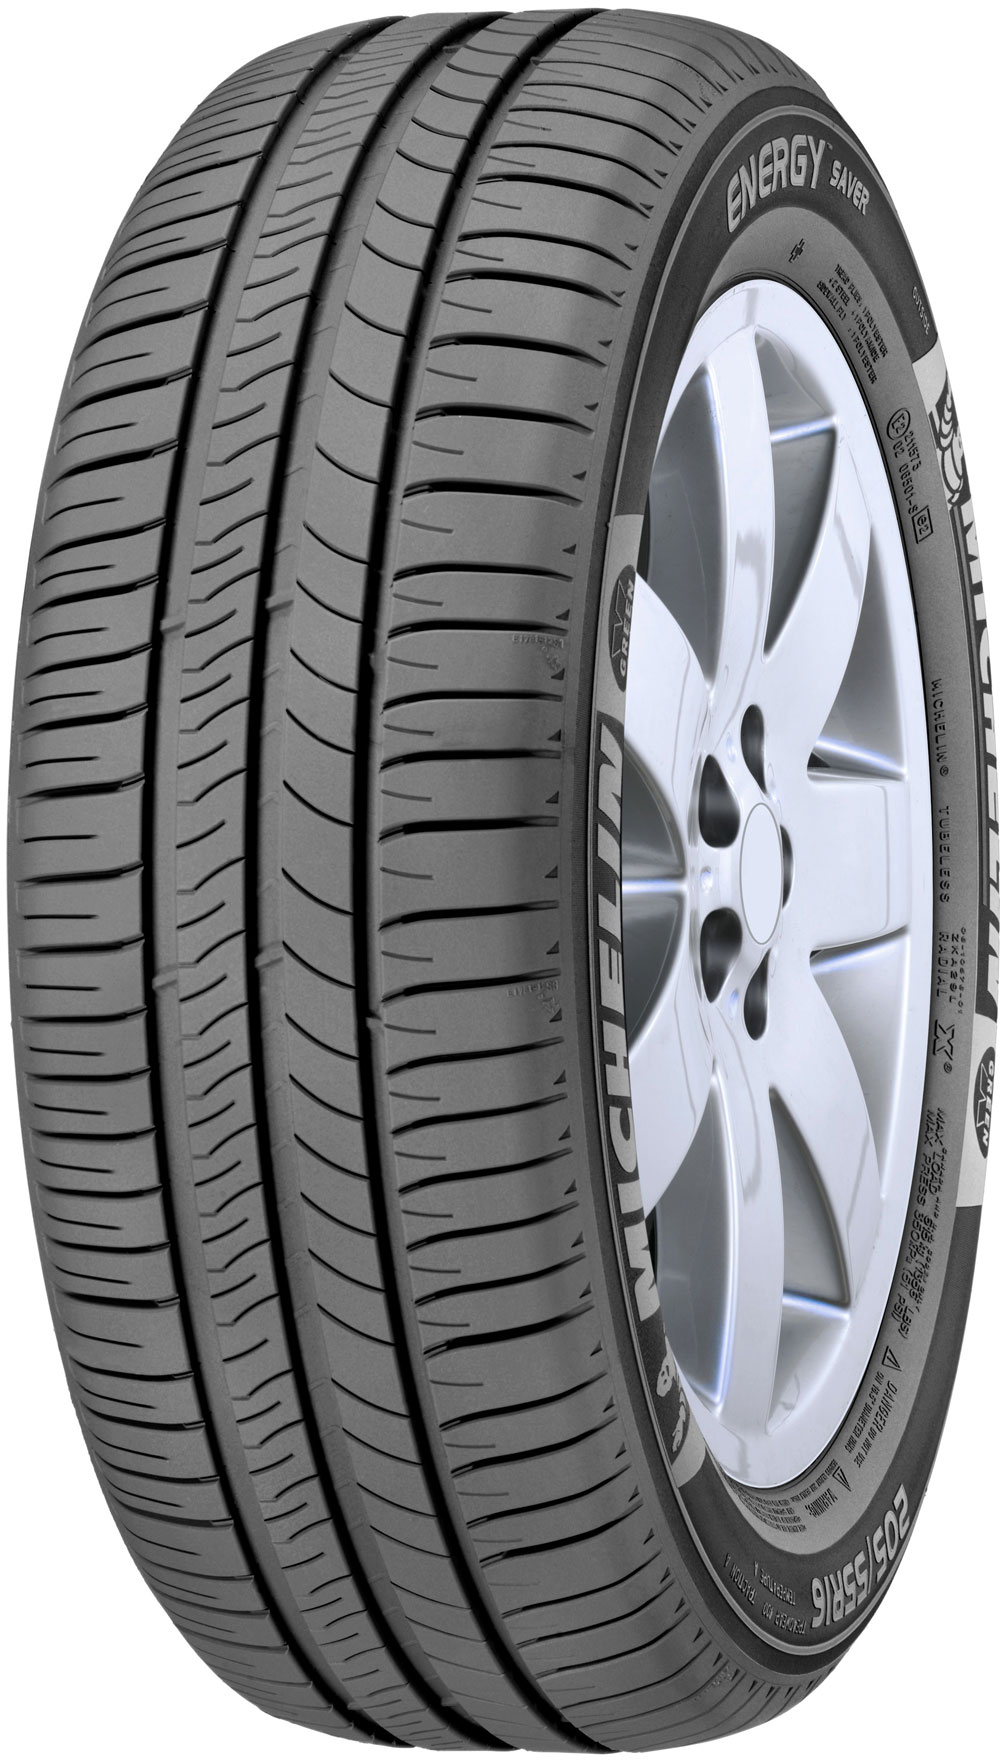 Anvelope auto MICHELIN ENERGY SAVER+ GRNX 185/70 R14 88T